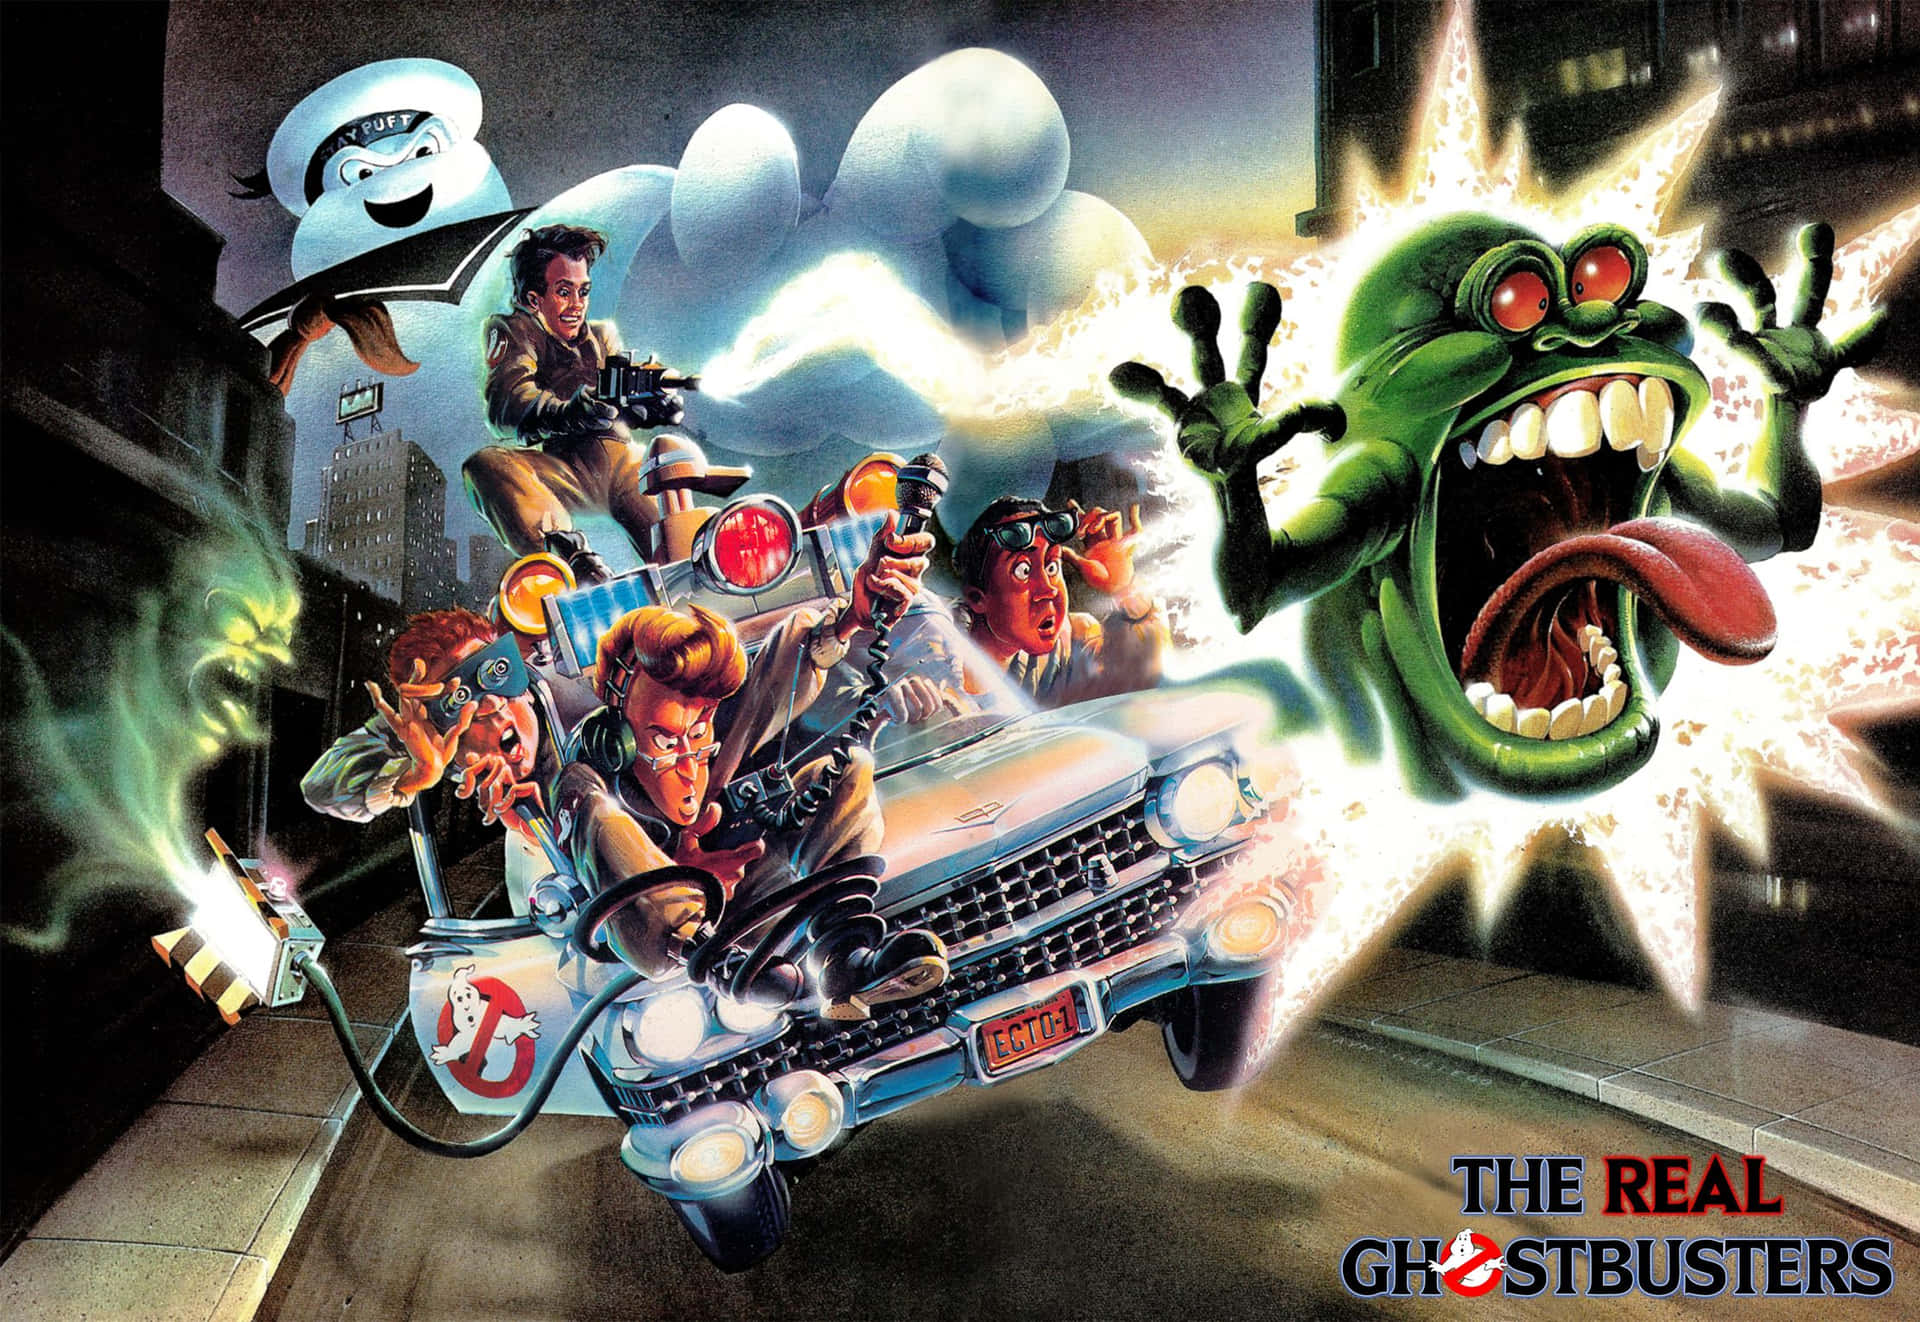 Be a Hero - Join the Ghostbusters!